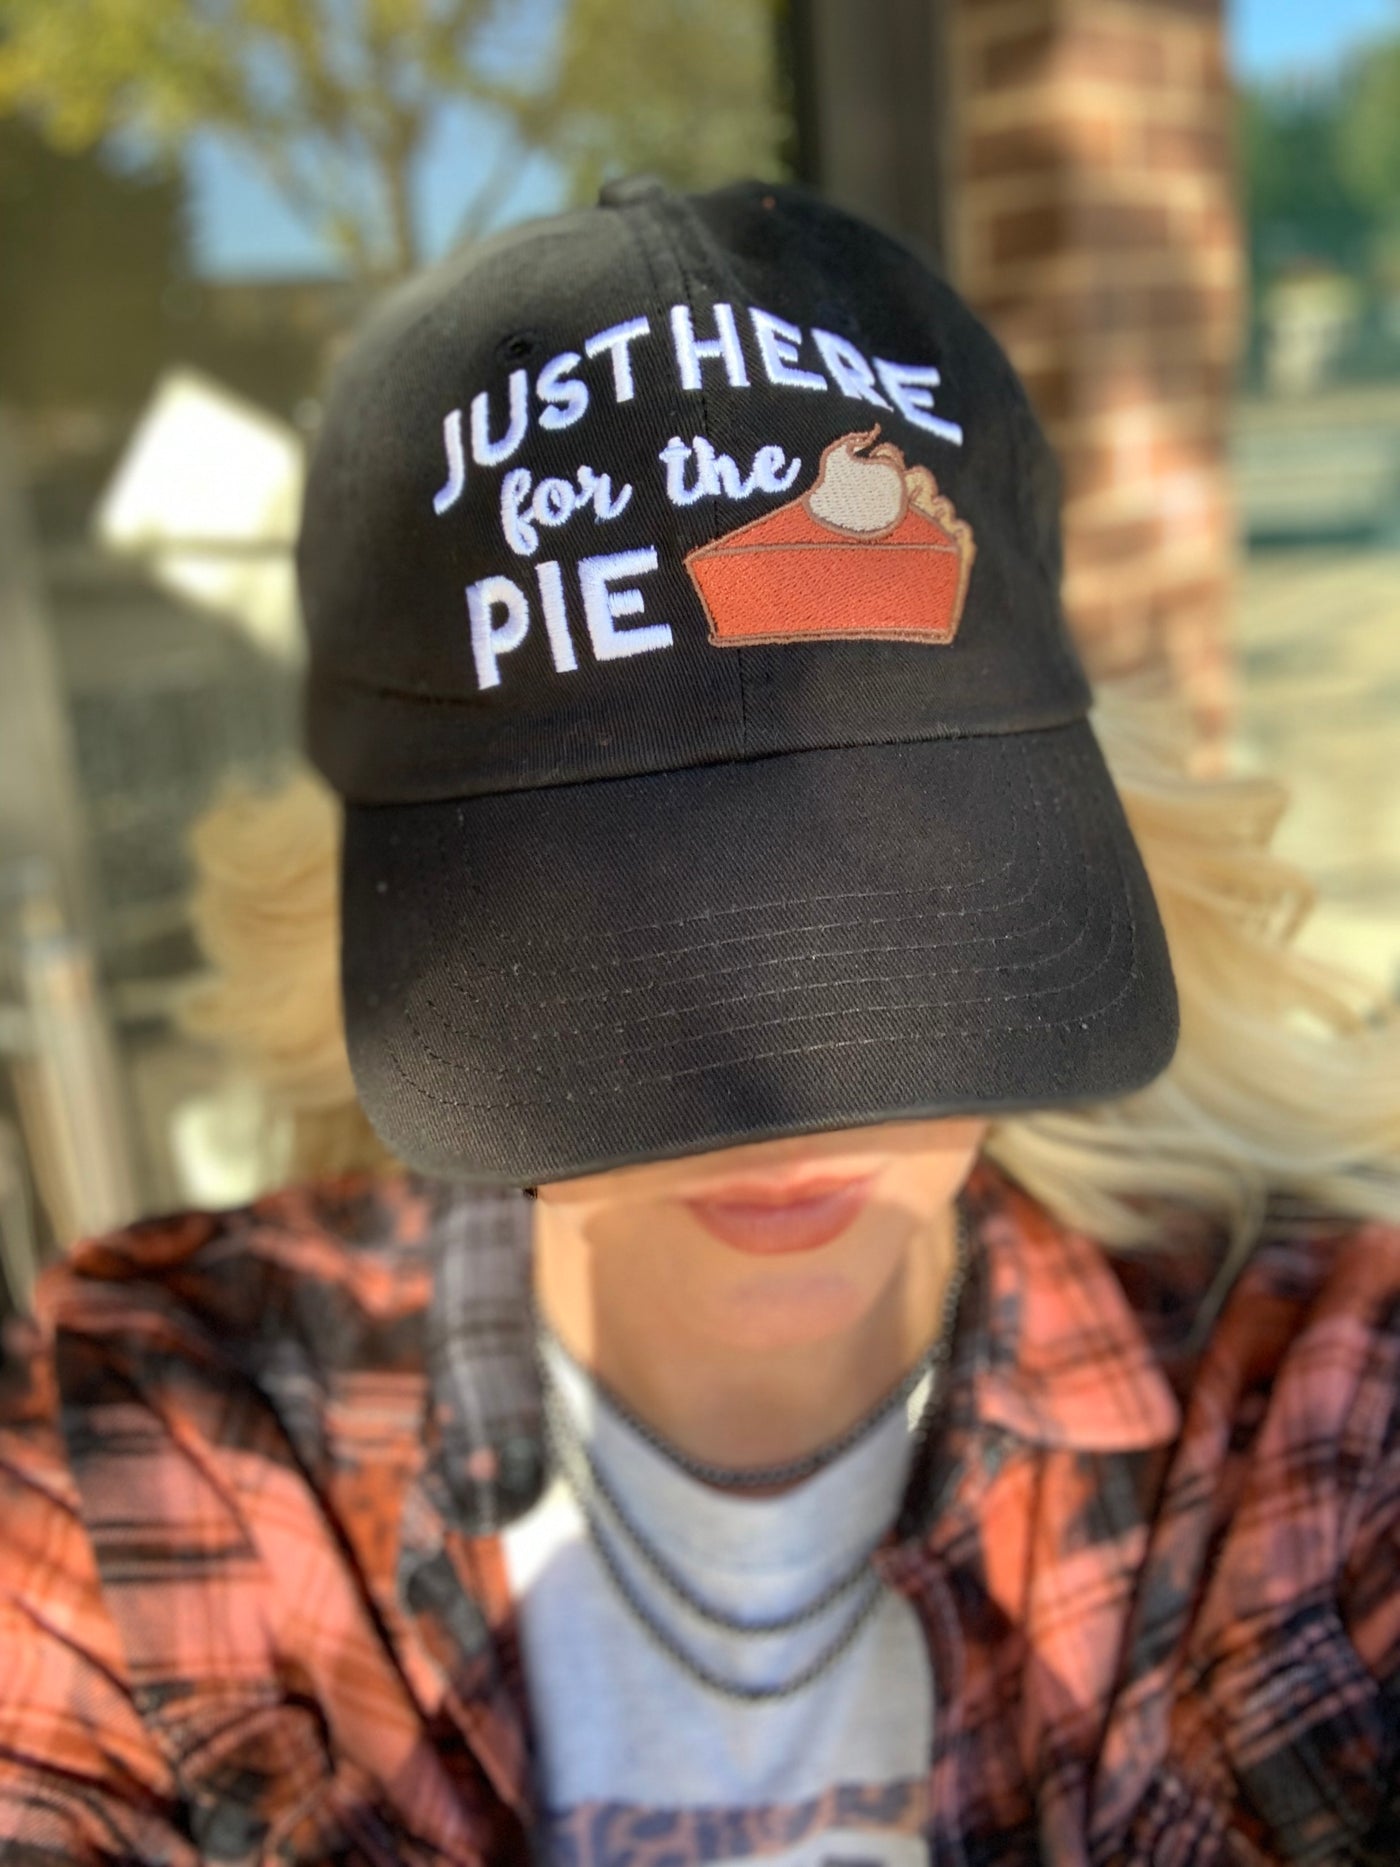 Just Here For This Pie Baseball Cap